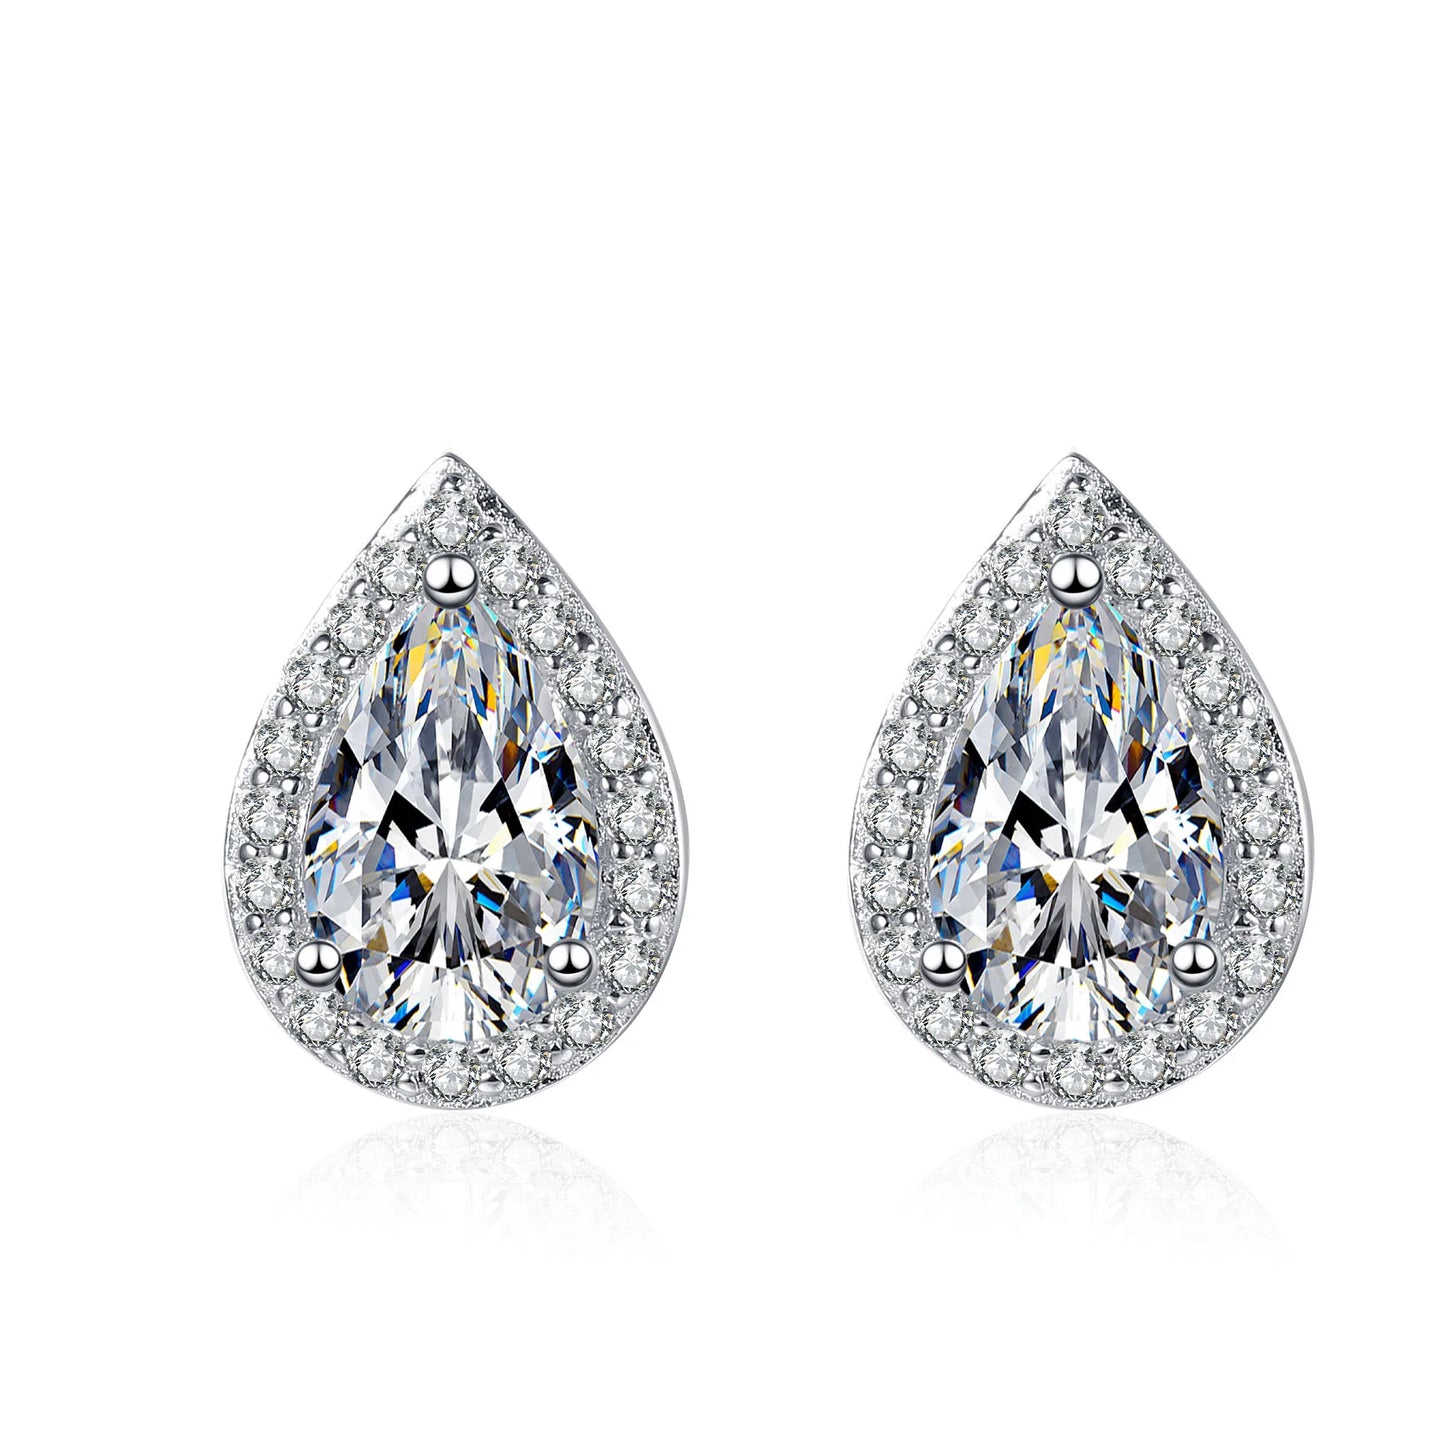 2ct Pear Moissanite Earrings in Platinum-Plated 925 Sterling Silver